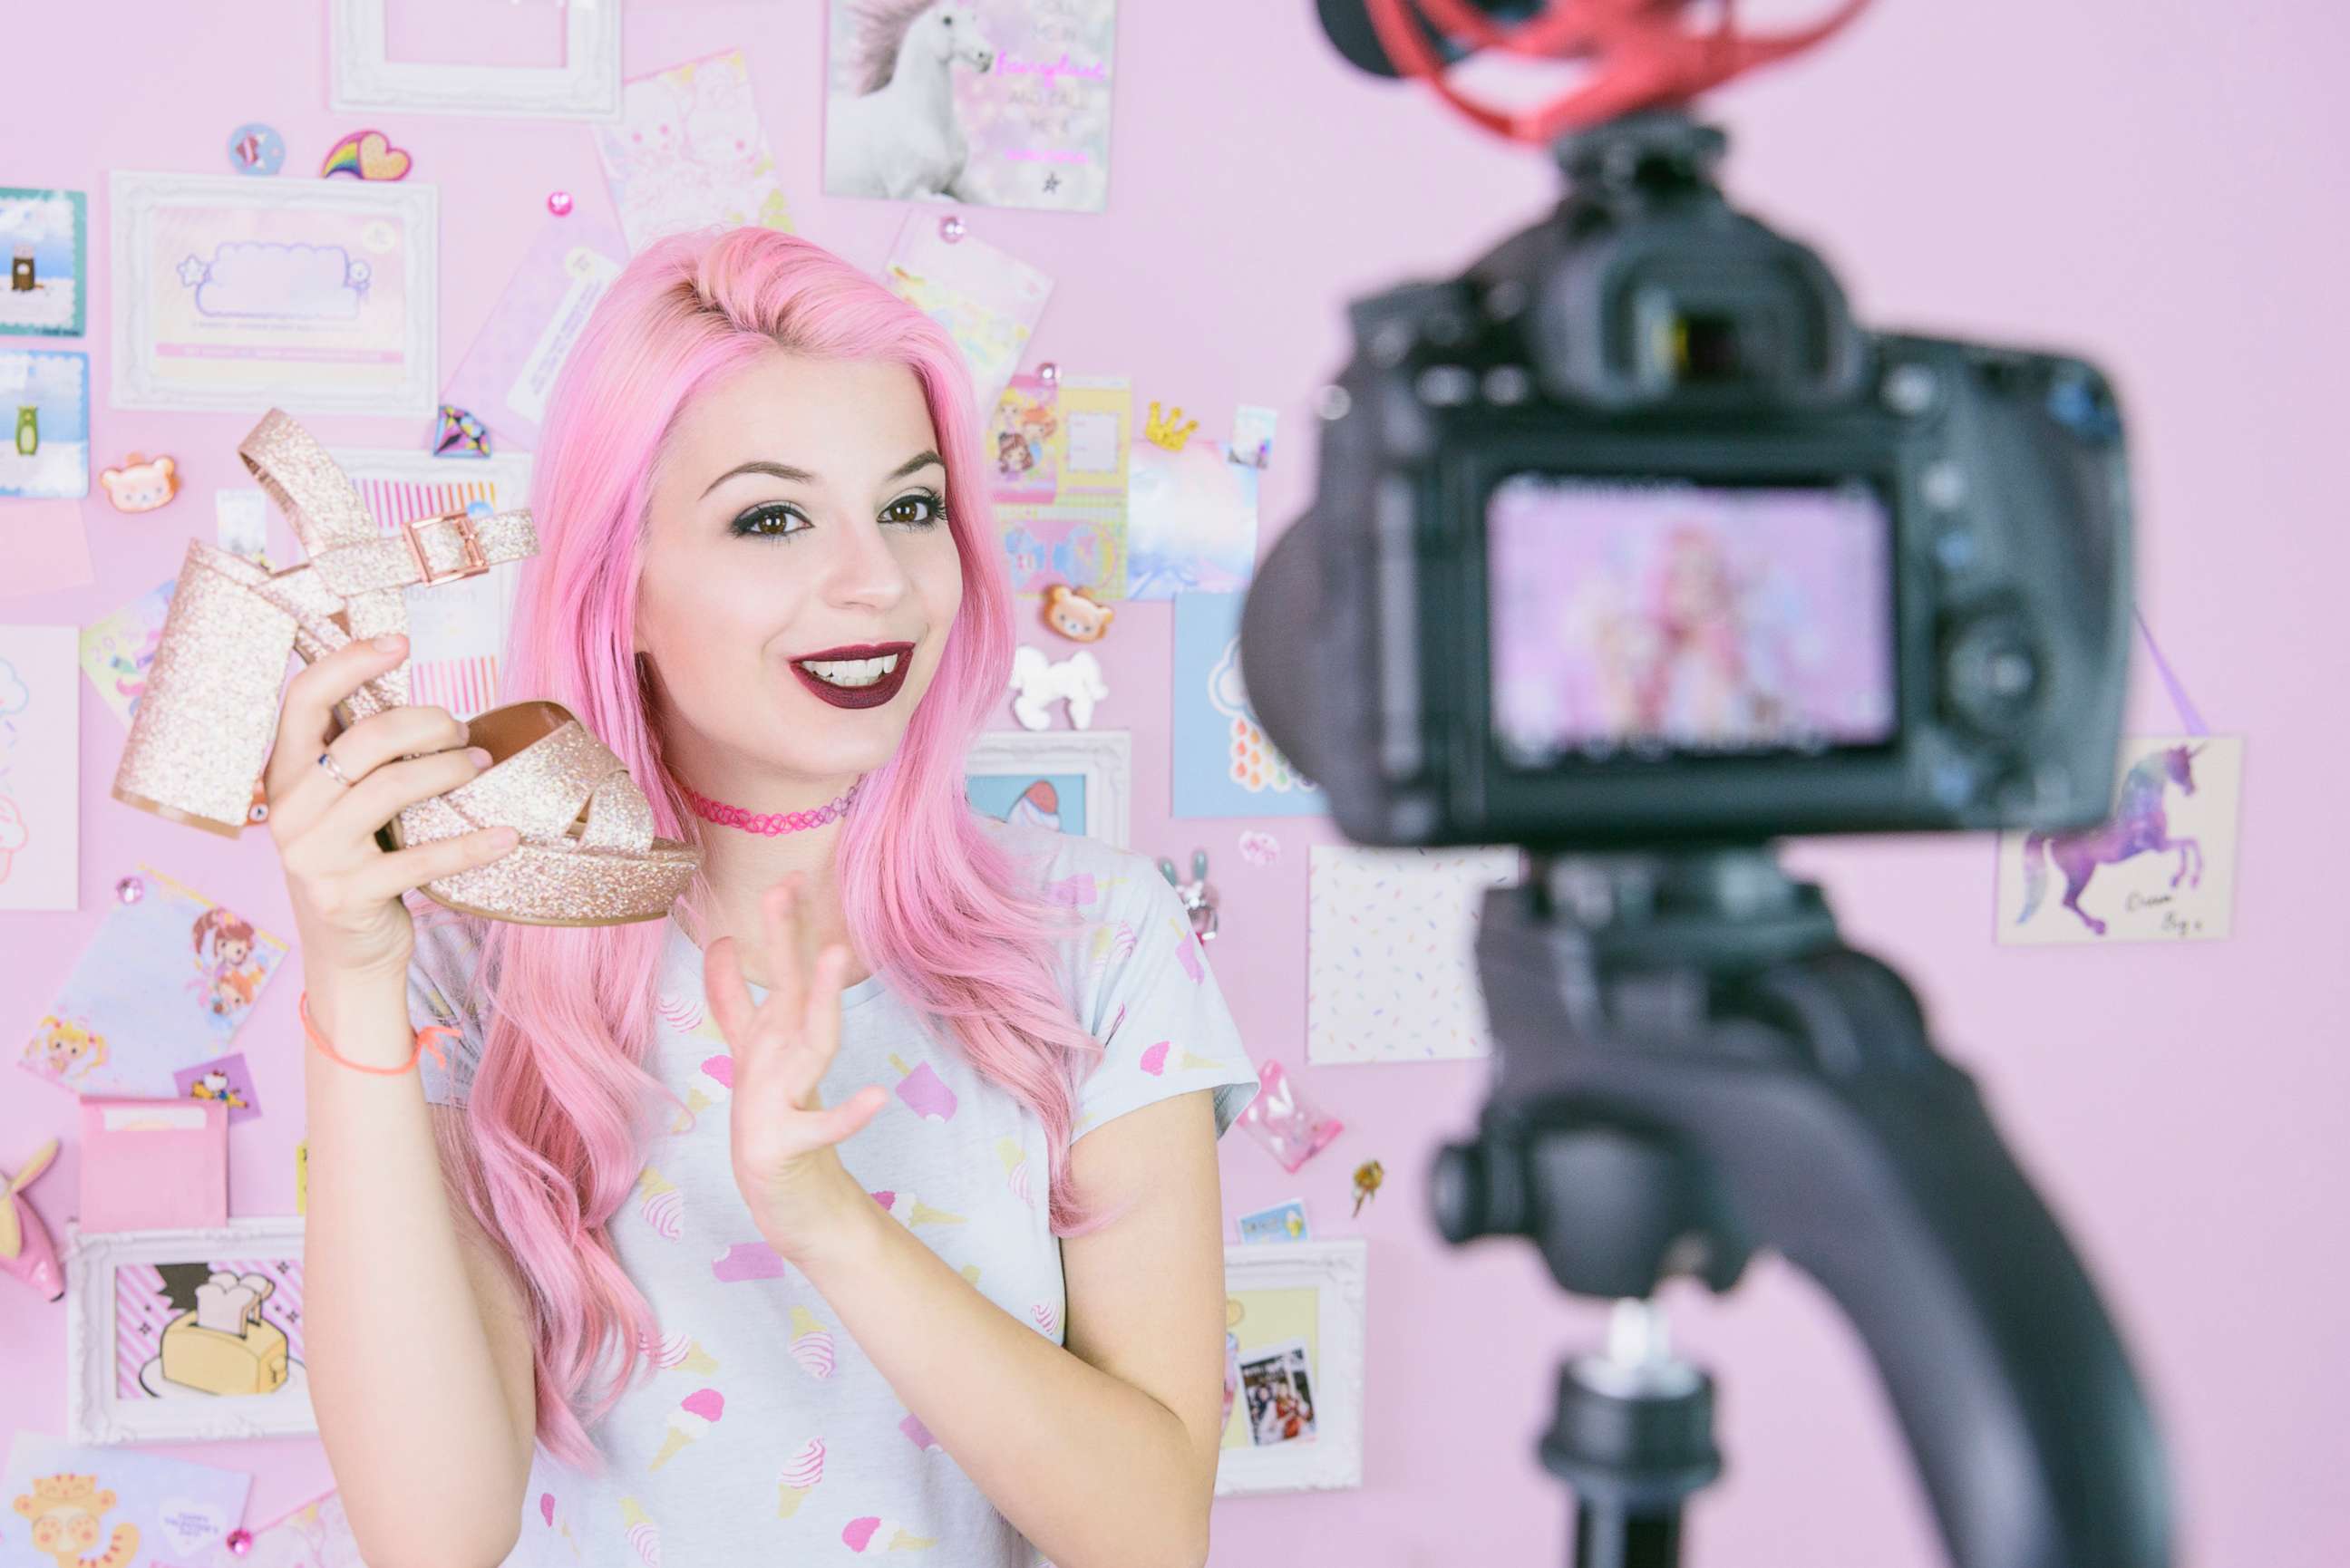 PHOTO: A staged photo of someone portraying a Social media influencer reviewing footwear, she is vlogging about women's fashion and filming herself at home on a video camera.